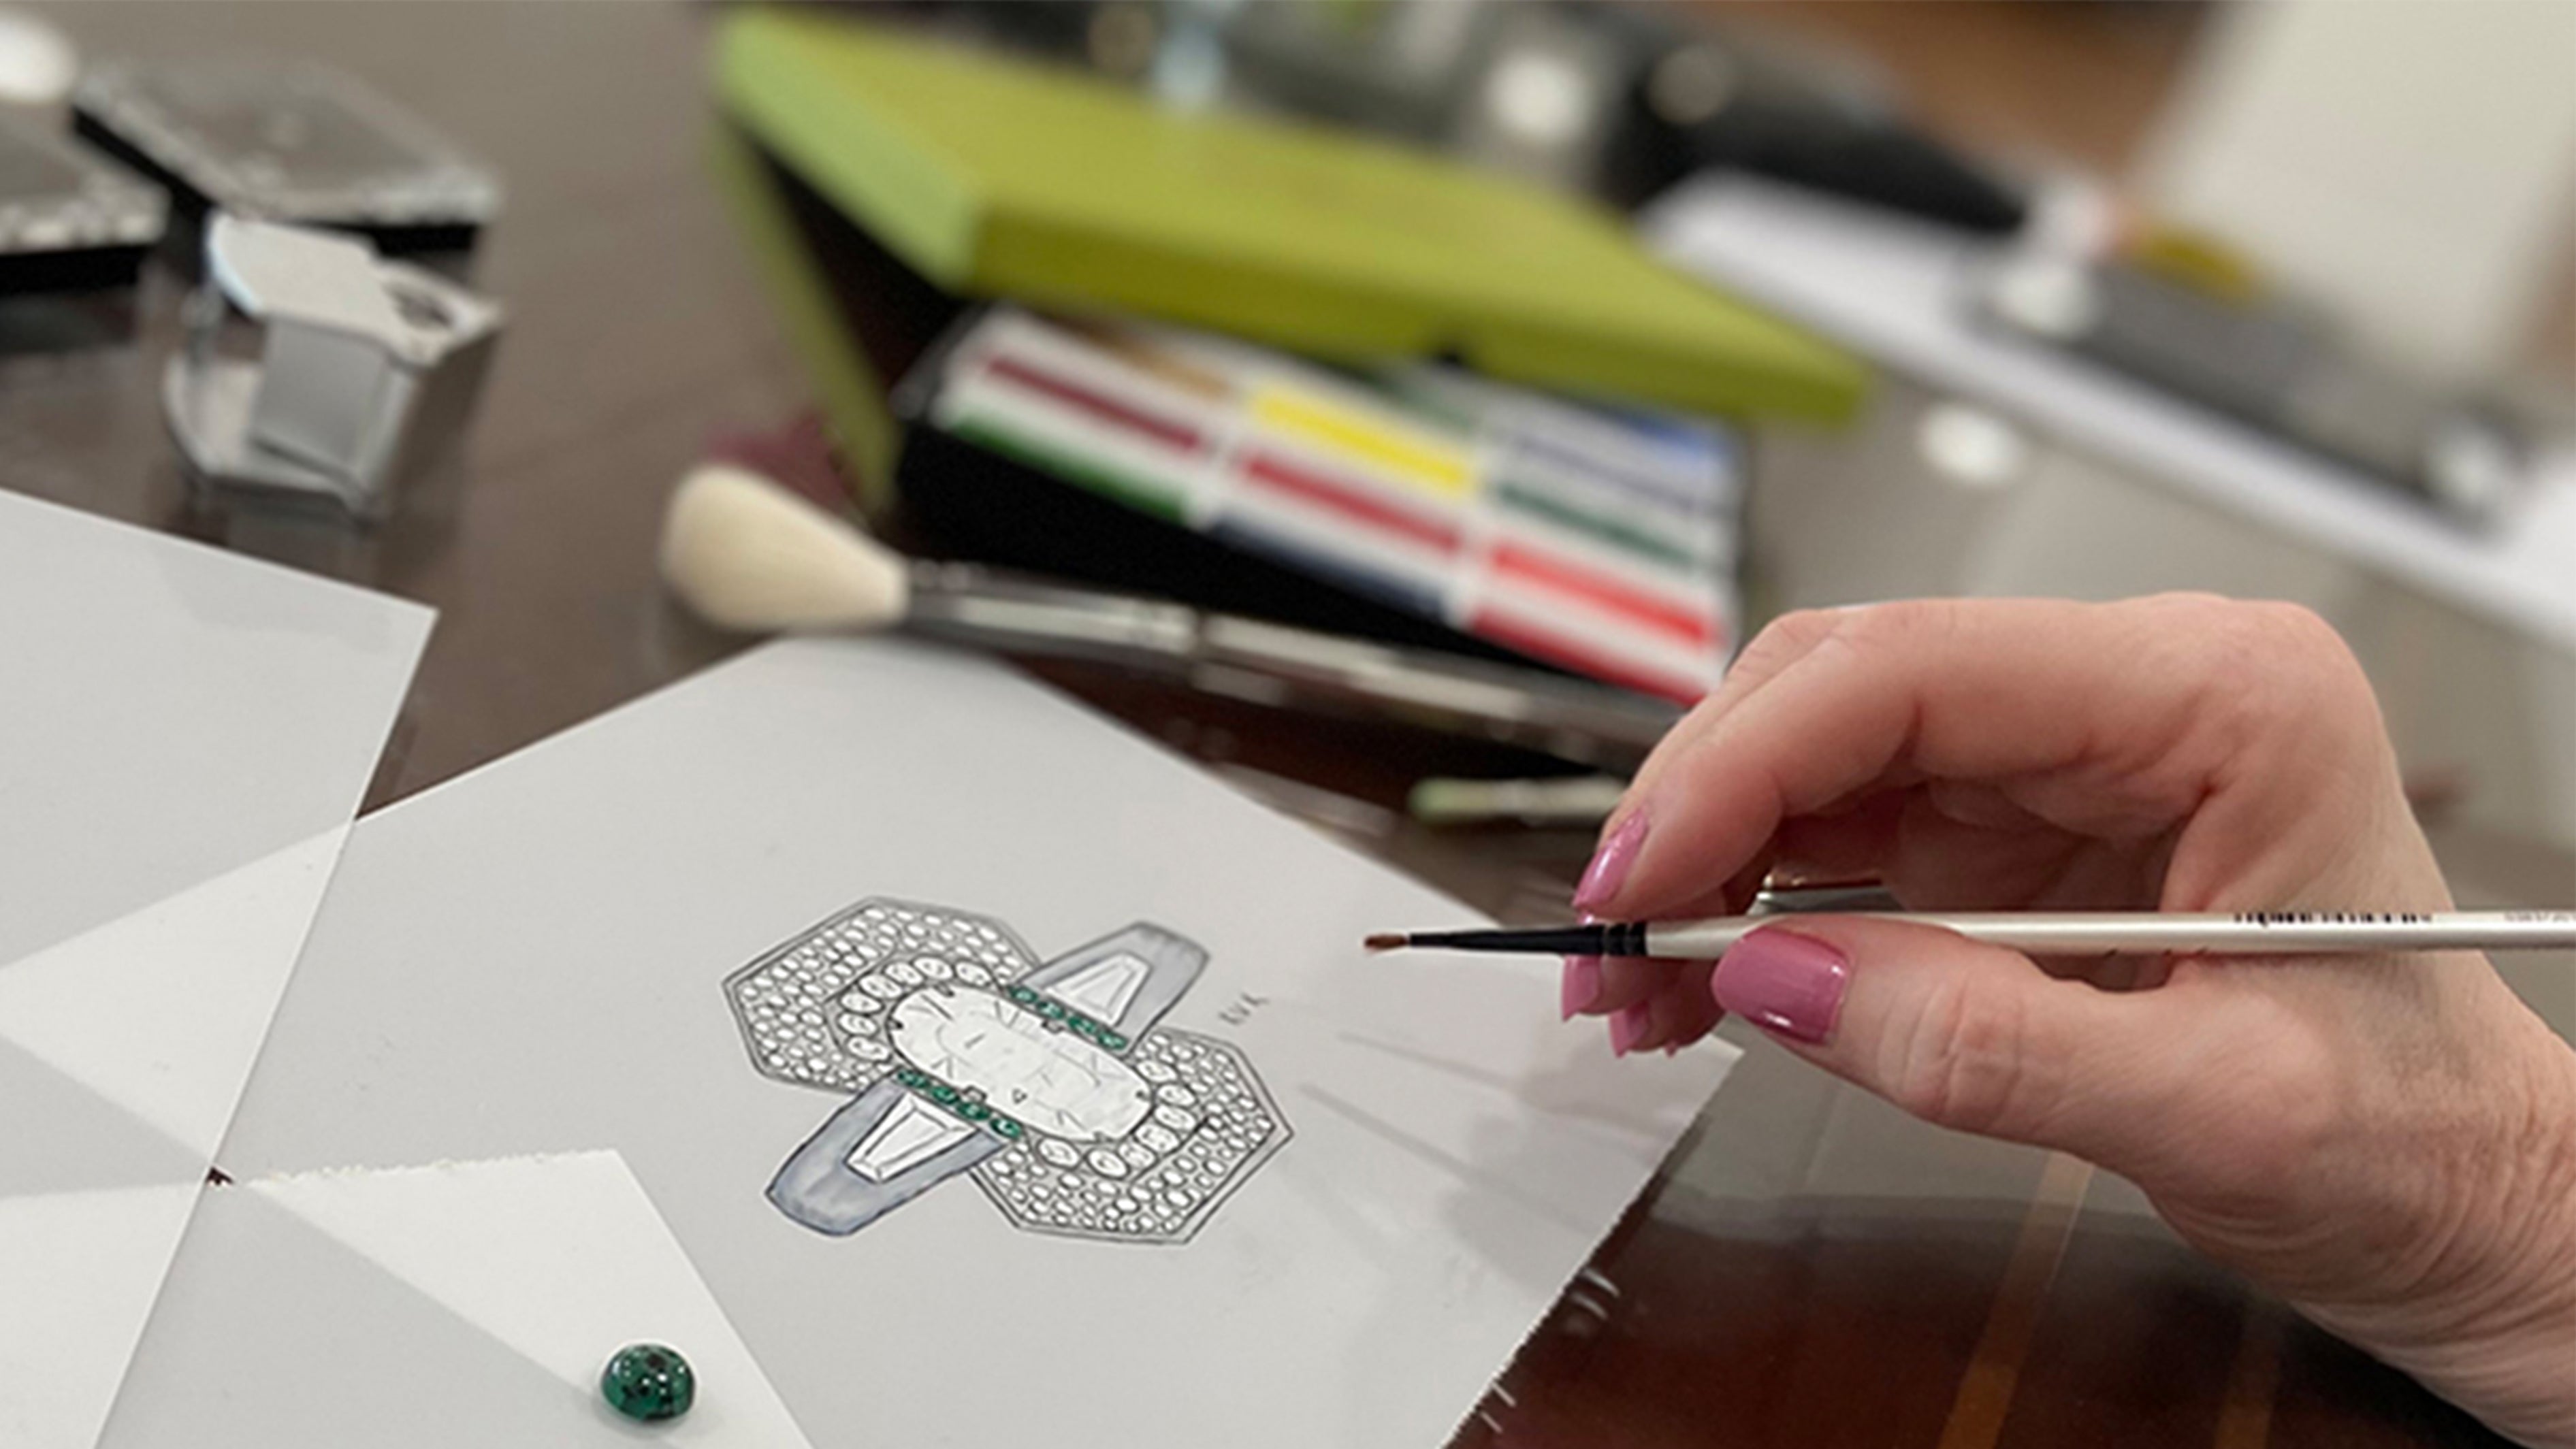 A hand holding a paint brush is finishing a painting of a custom design ring with a big oval diamond in the center and two tapered baguette diamonds on either side.  The desk has blurred paint brushes and paint colors in the background.